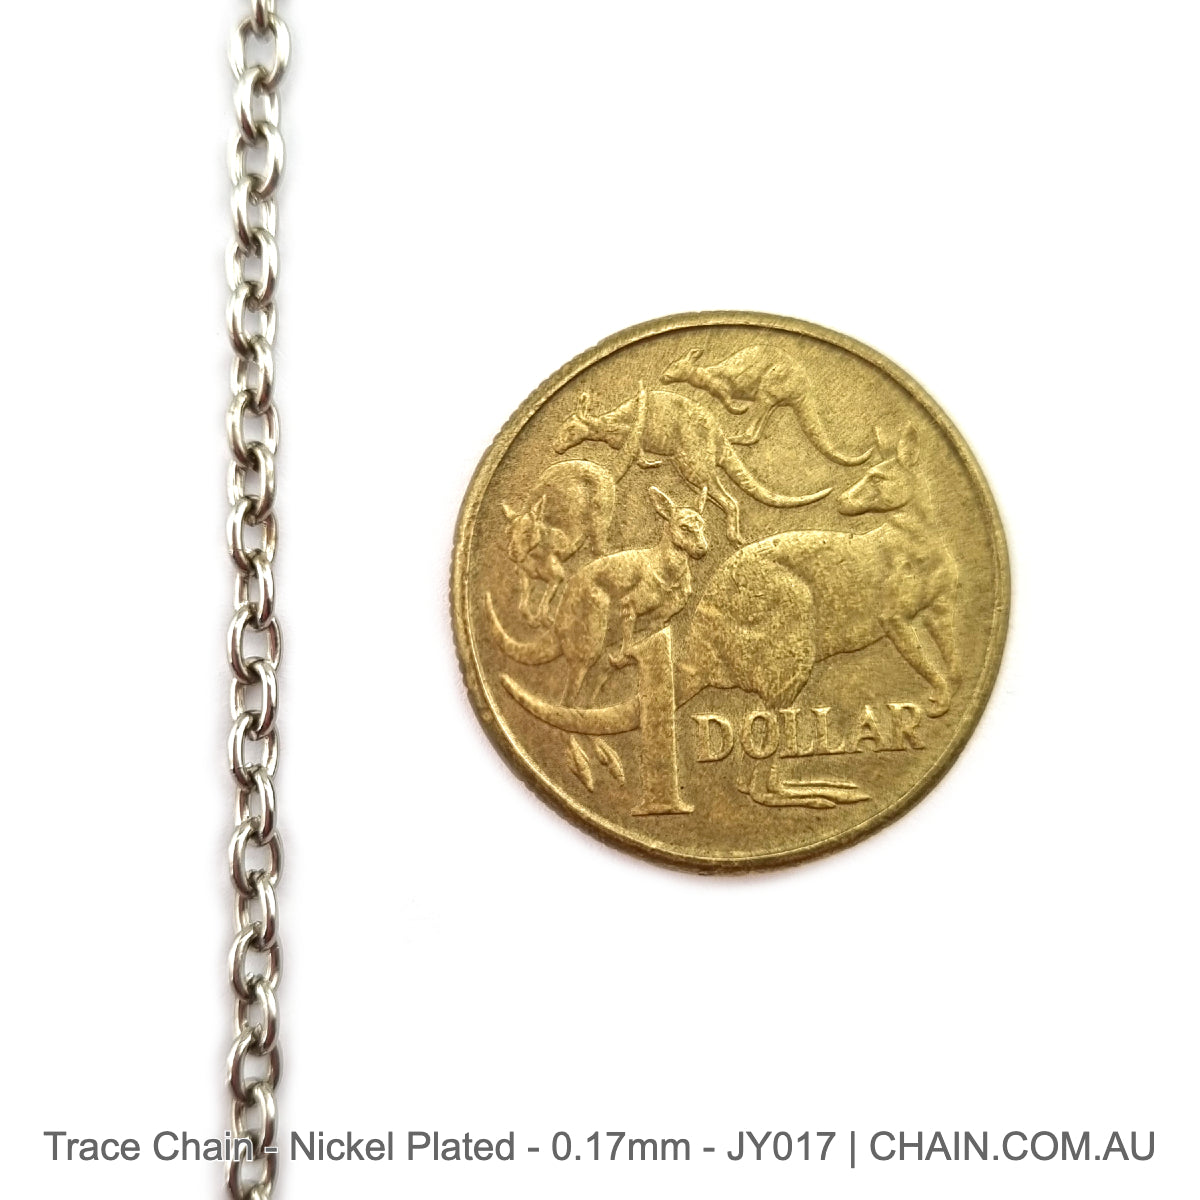 Nickel-plated trace jewellery chain, size 0.17mm, quantity 25m. Australia wide shipping. Shop online chain.com.au